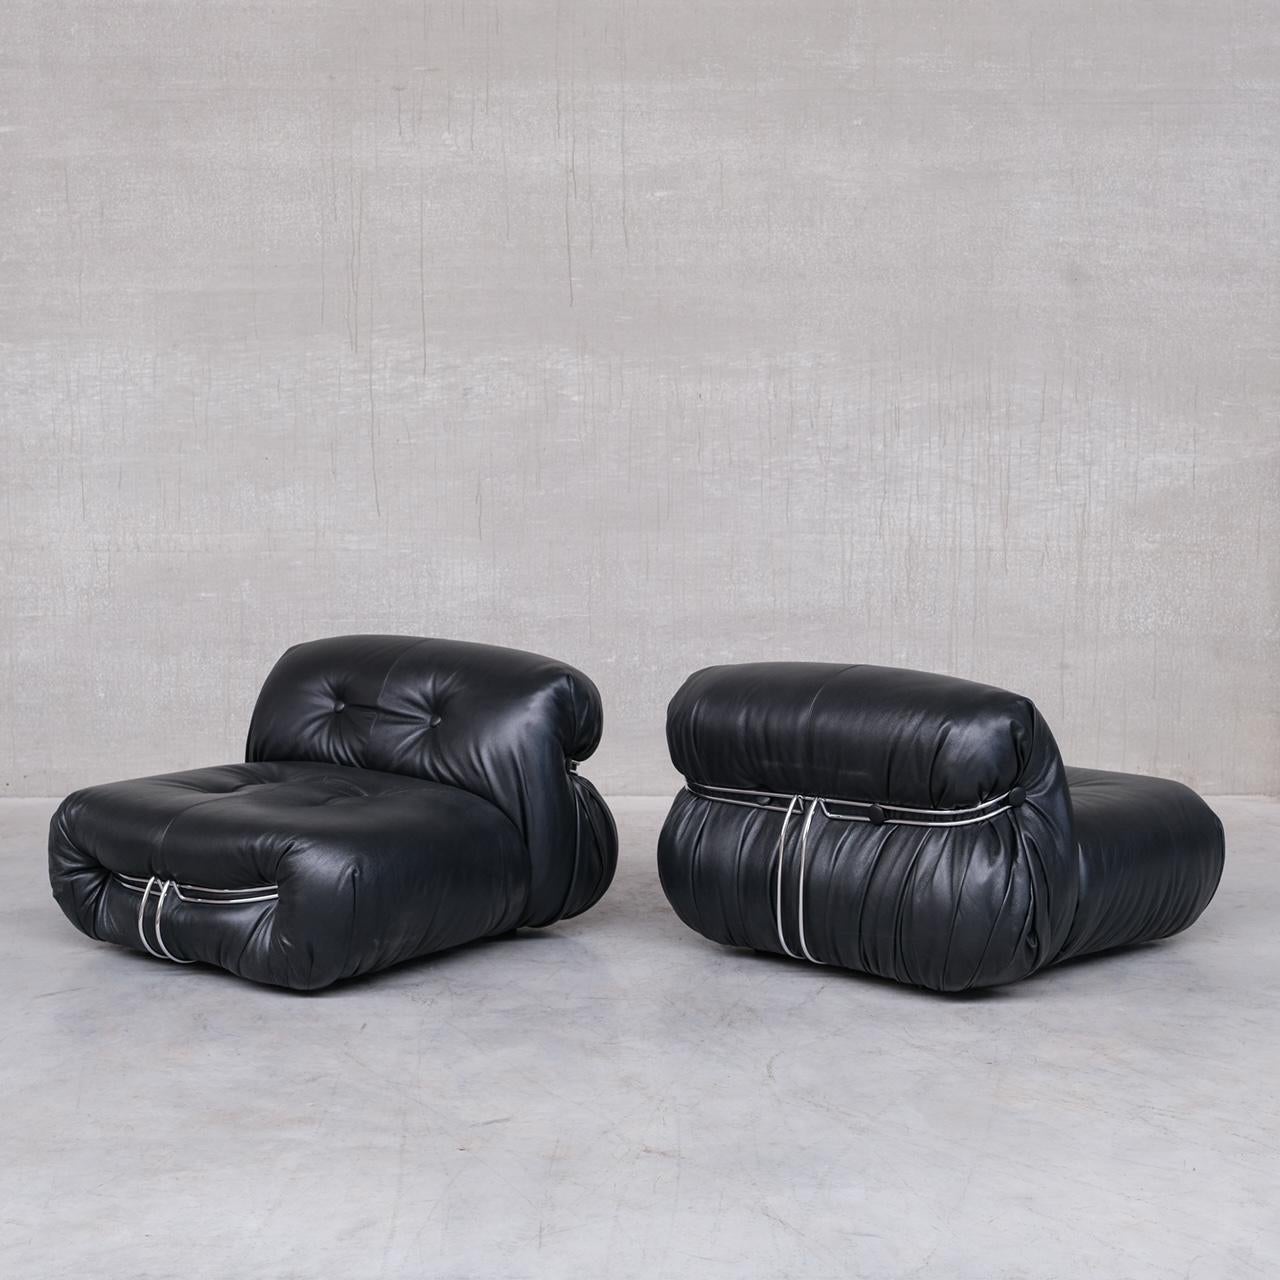 Italian Pair of Leather Soriana Lounge Chairs by Scarpa for Cassina